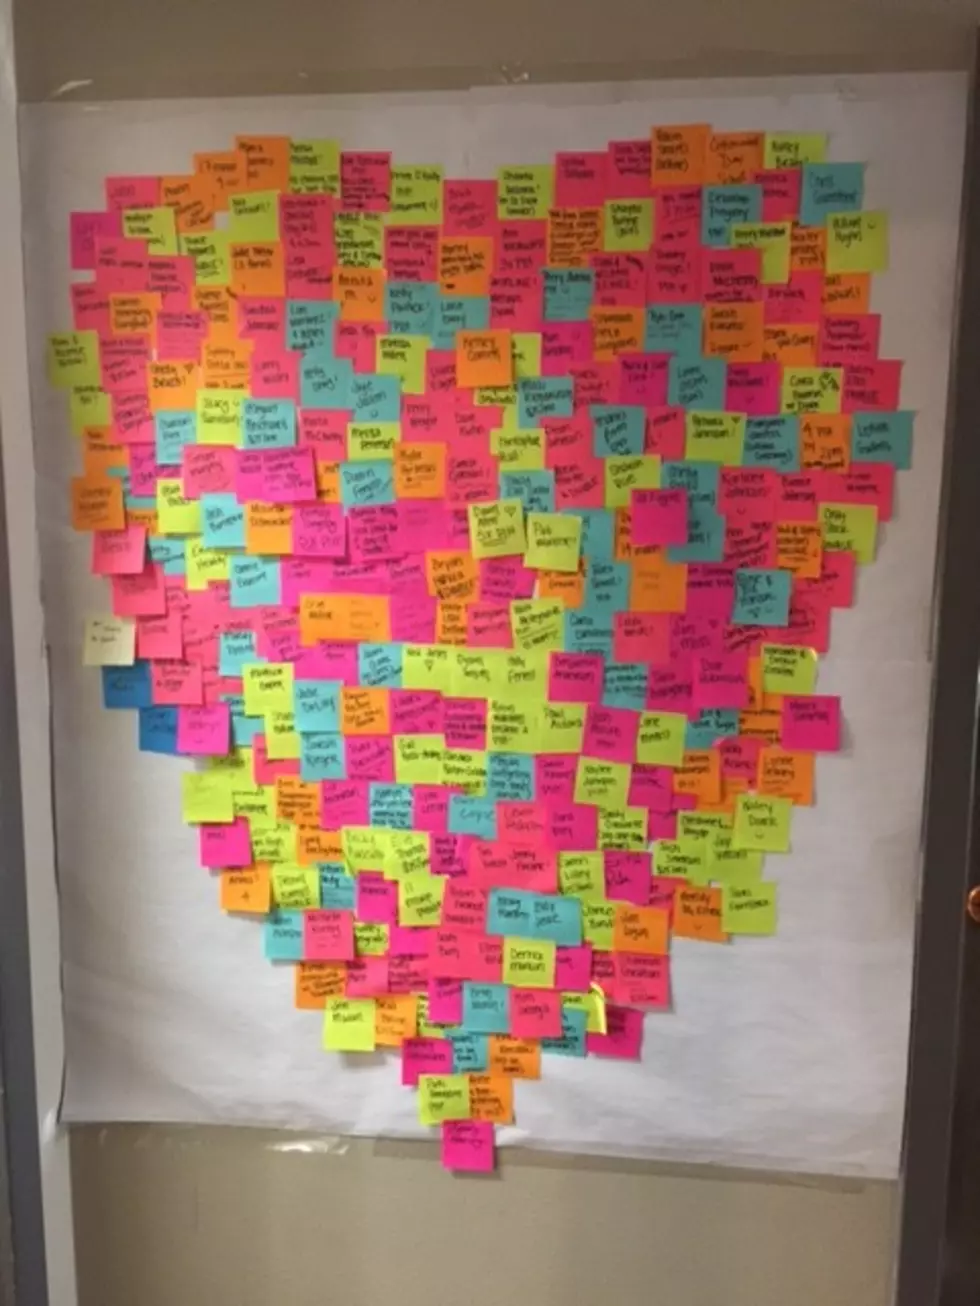 How Many Post-it Notes Make Up Our St. Jude Heart?